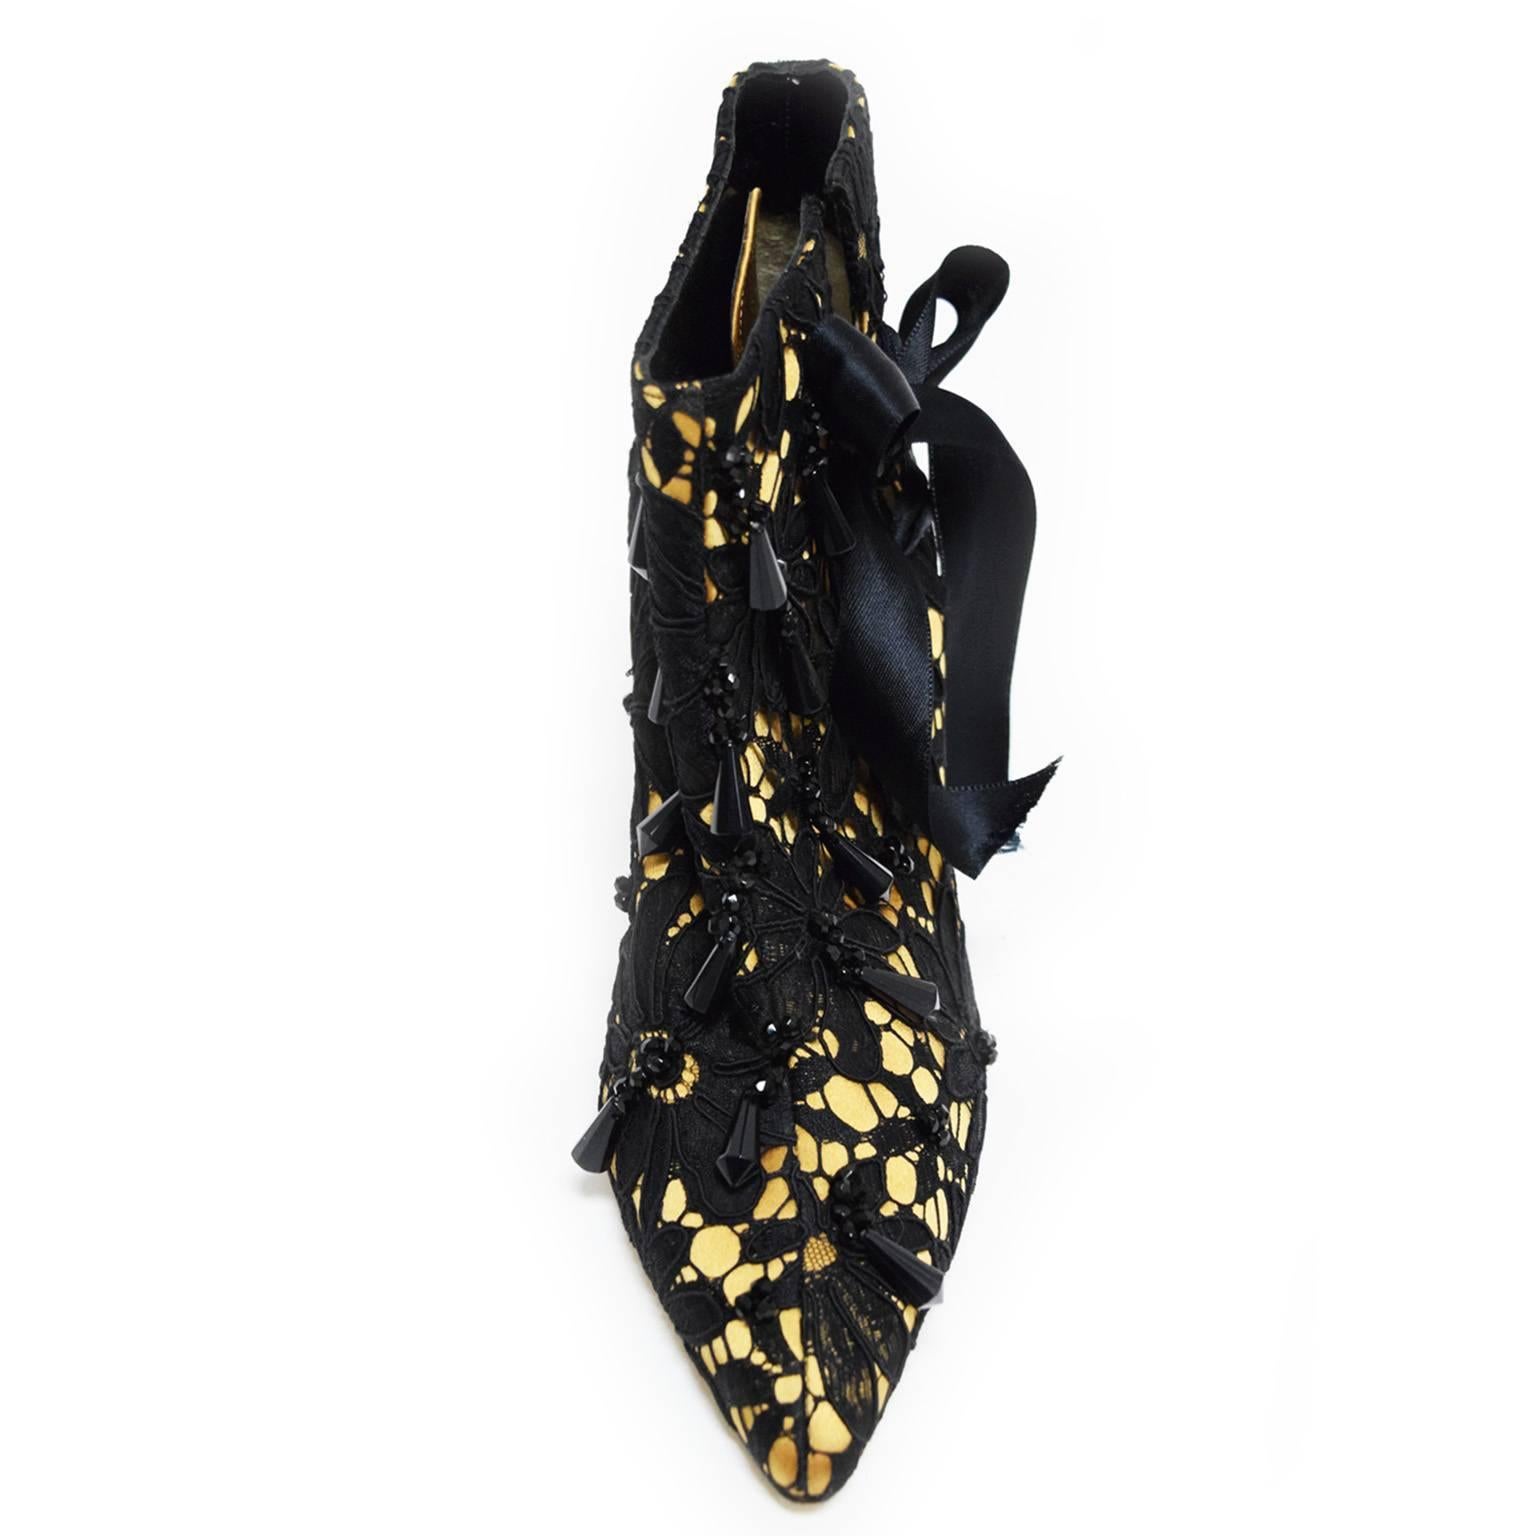 The Tucky shoe was featured in Blahnik by Boman book and are dated back to  1998. The Tucky is covered in black lace on top of a beige satin underlay. The heels lace up on the side with a satin ribbon creating a delicate look and complimenting the